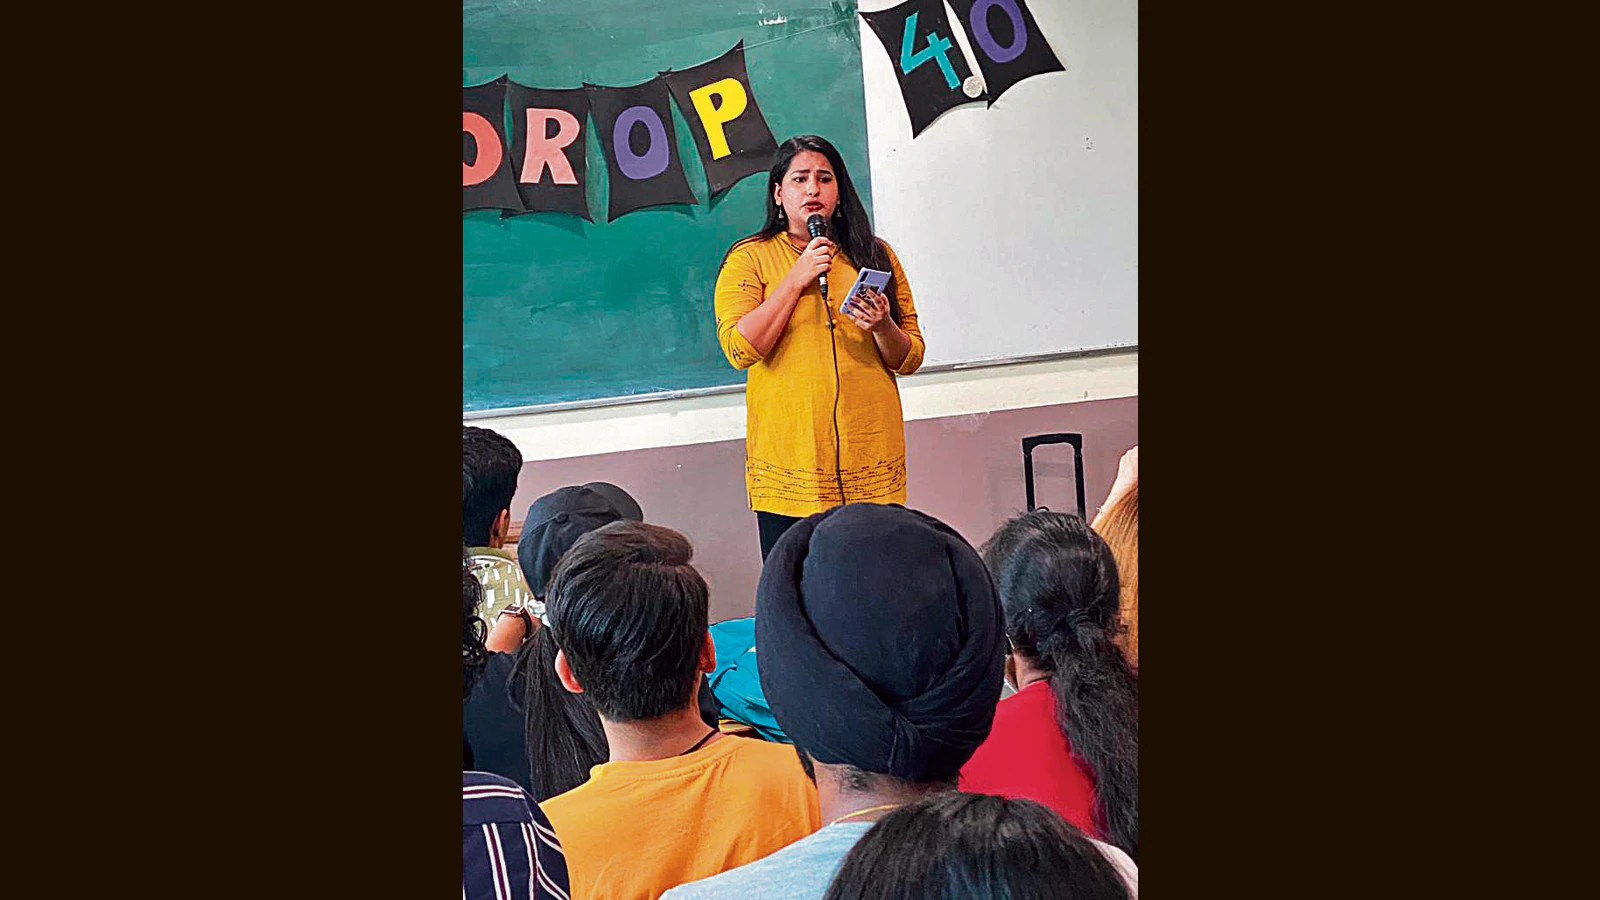 DU students hail return of open mic events: Safe spaces to exhibit talent